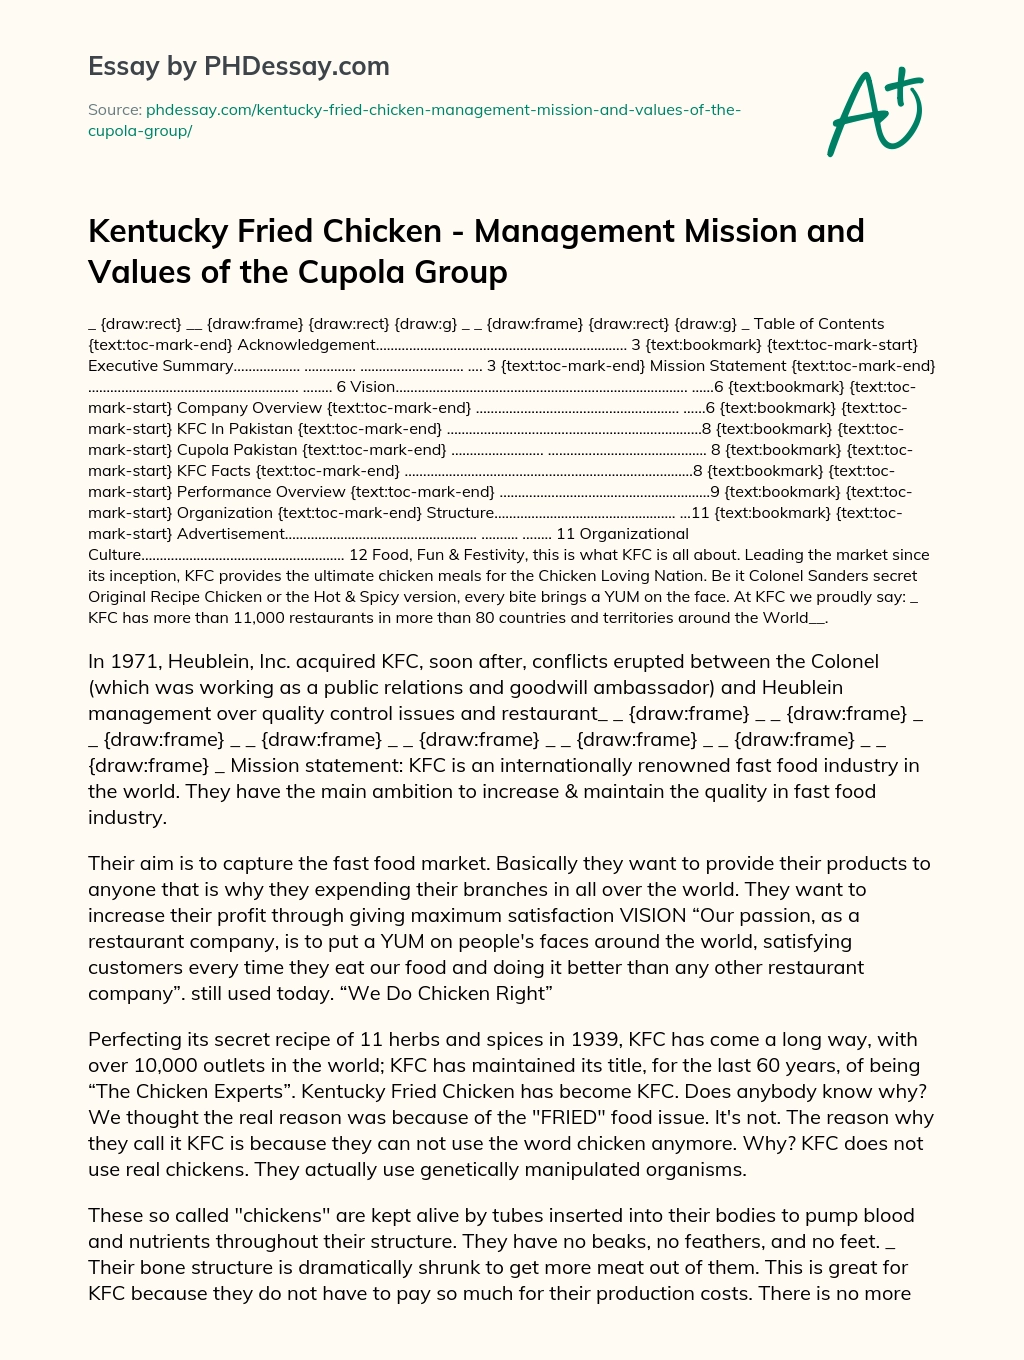 Kentucky Fried Chicken – Management Mission and Values of the Cupola Group essay